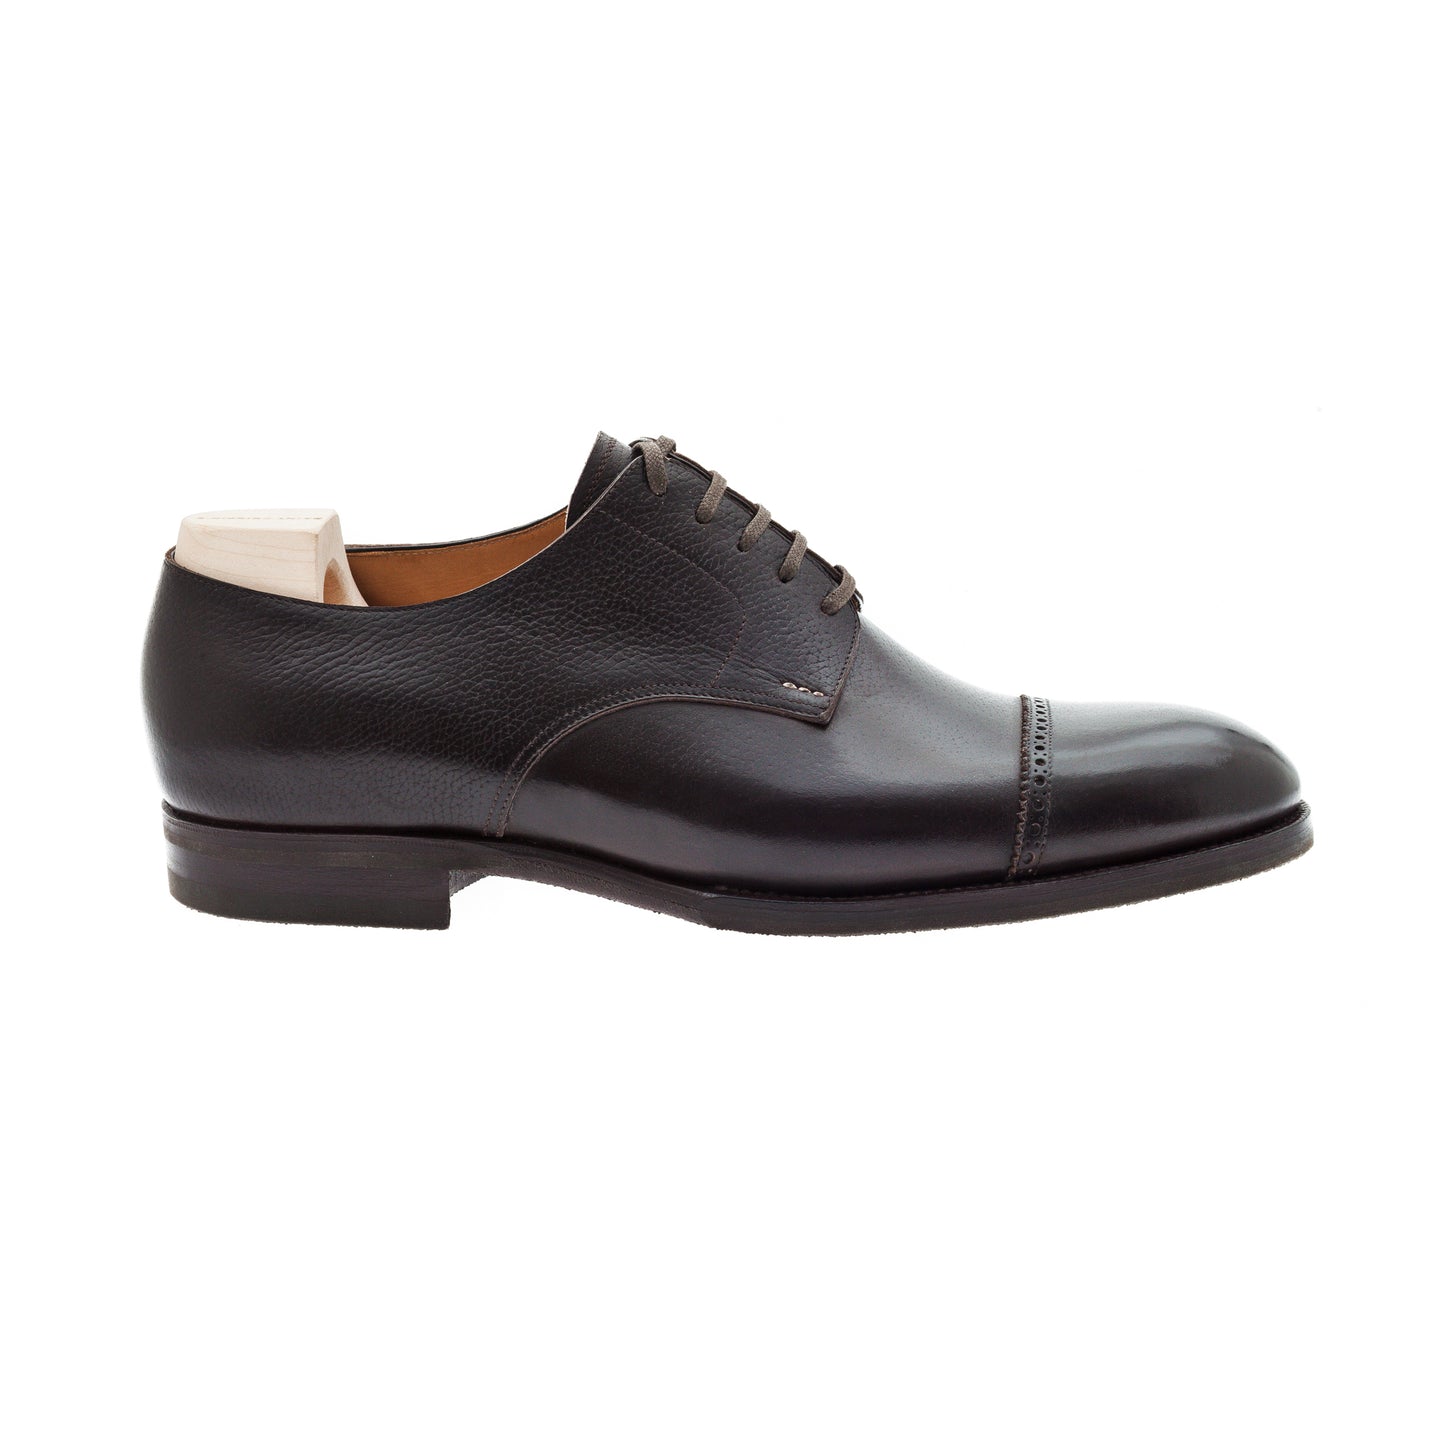 Five eyelet Derby with brogued, straight toe cap in dark brown Inca grain leather